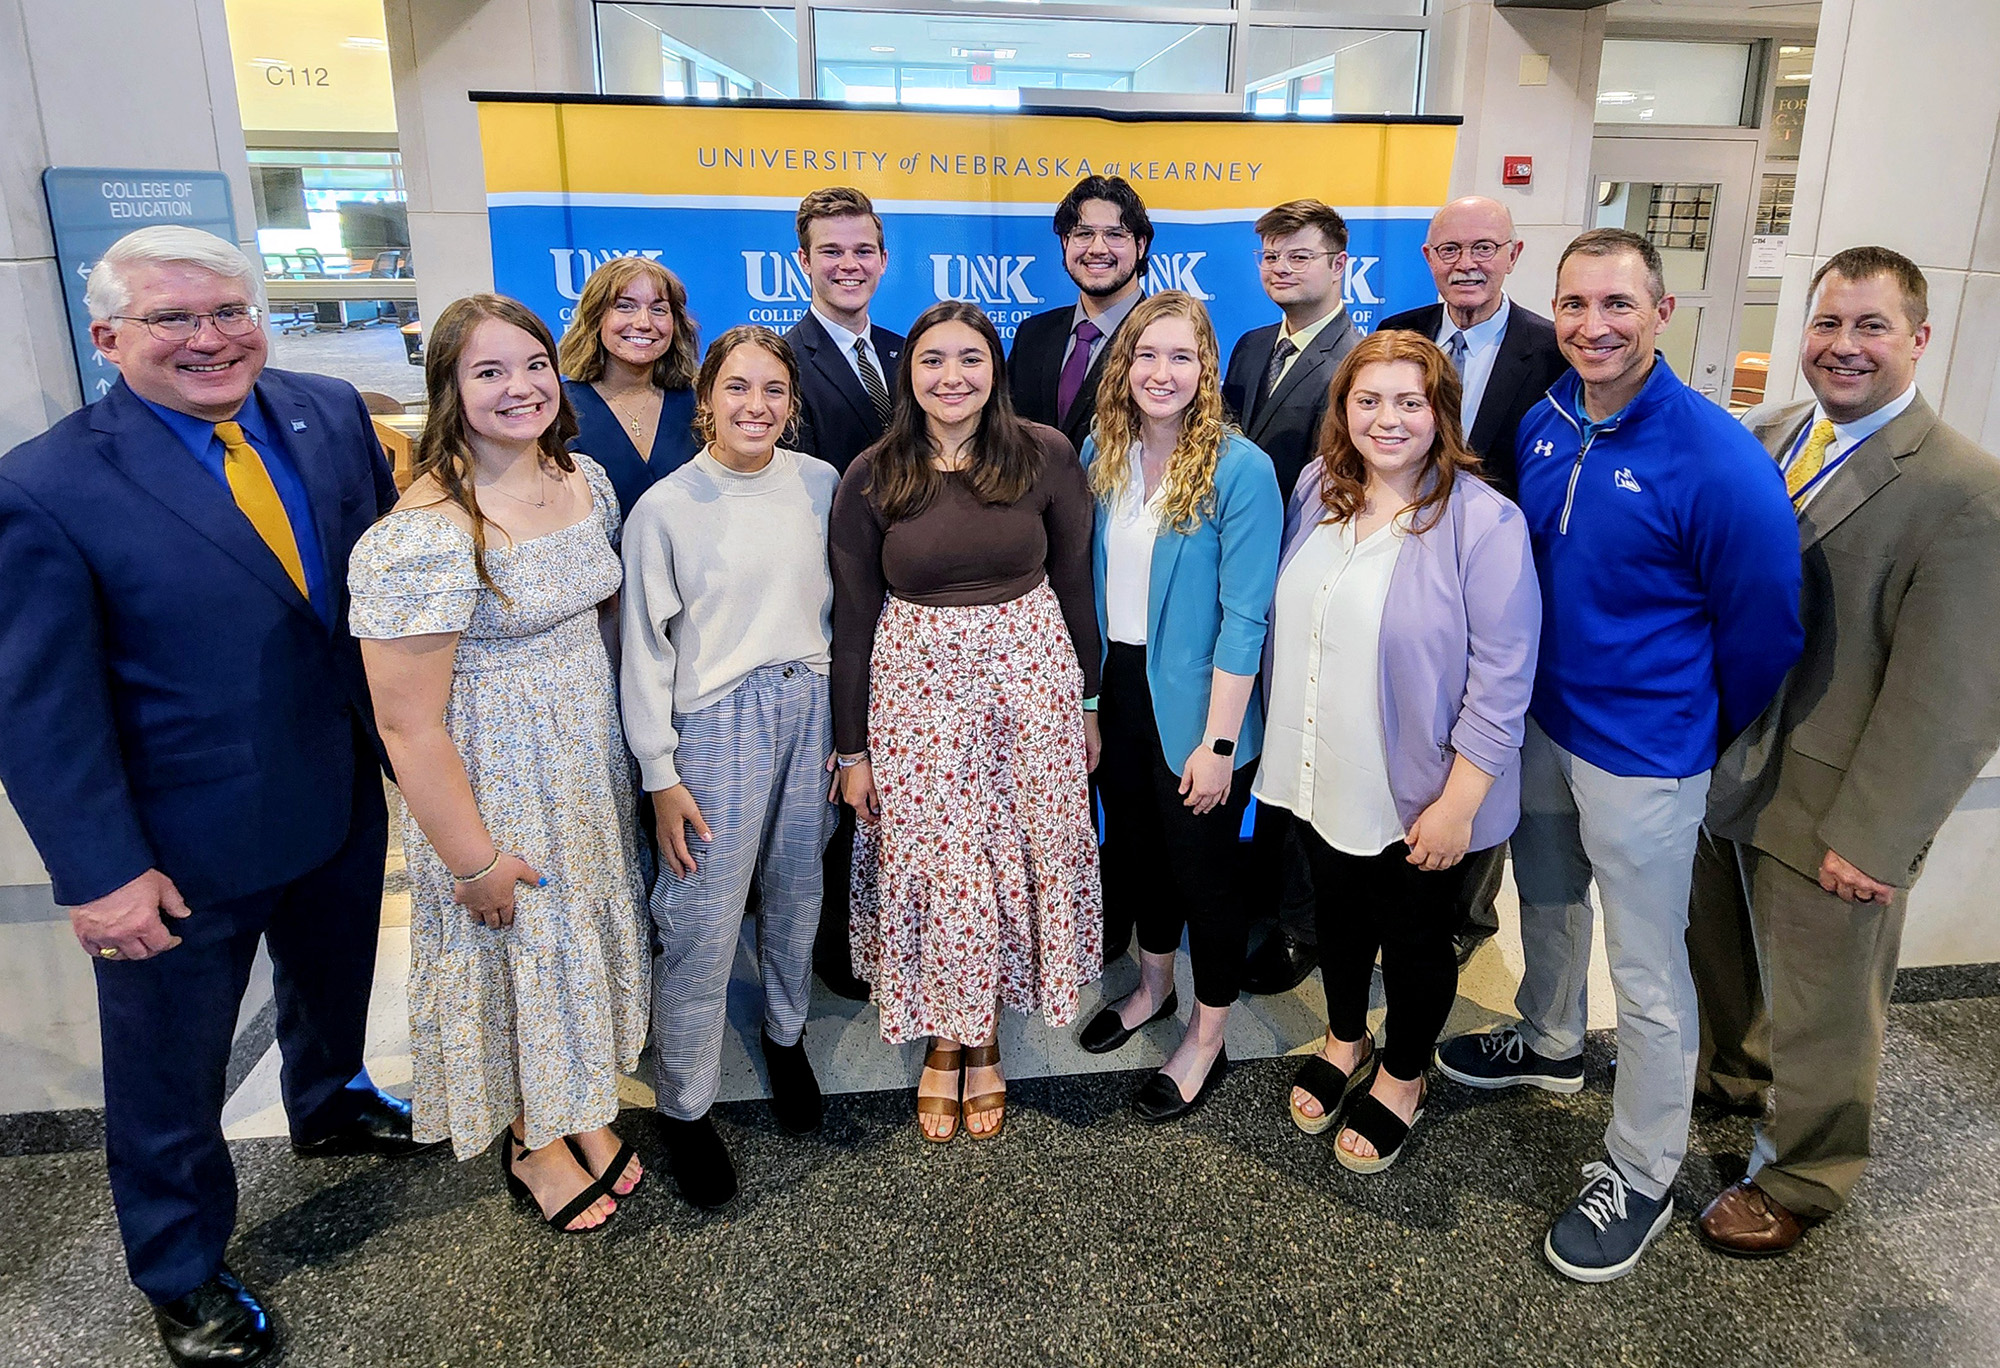 Nine UNK and Kearney High School students received the inaugural Kearney Teachers Tomorrow scholarships. They were recognized Friday during a signing ceremony at UNK's College of Education building.